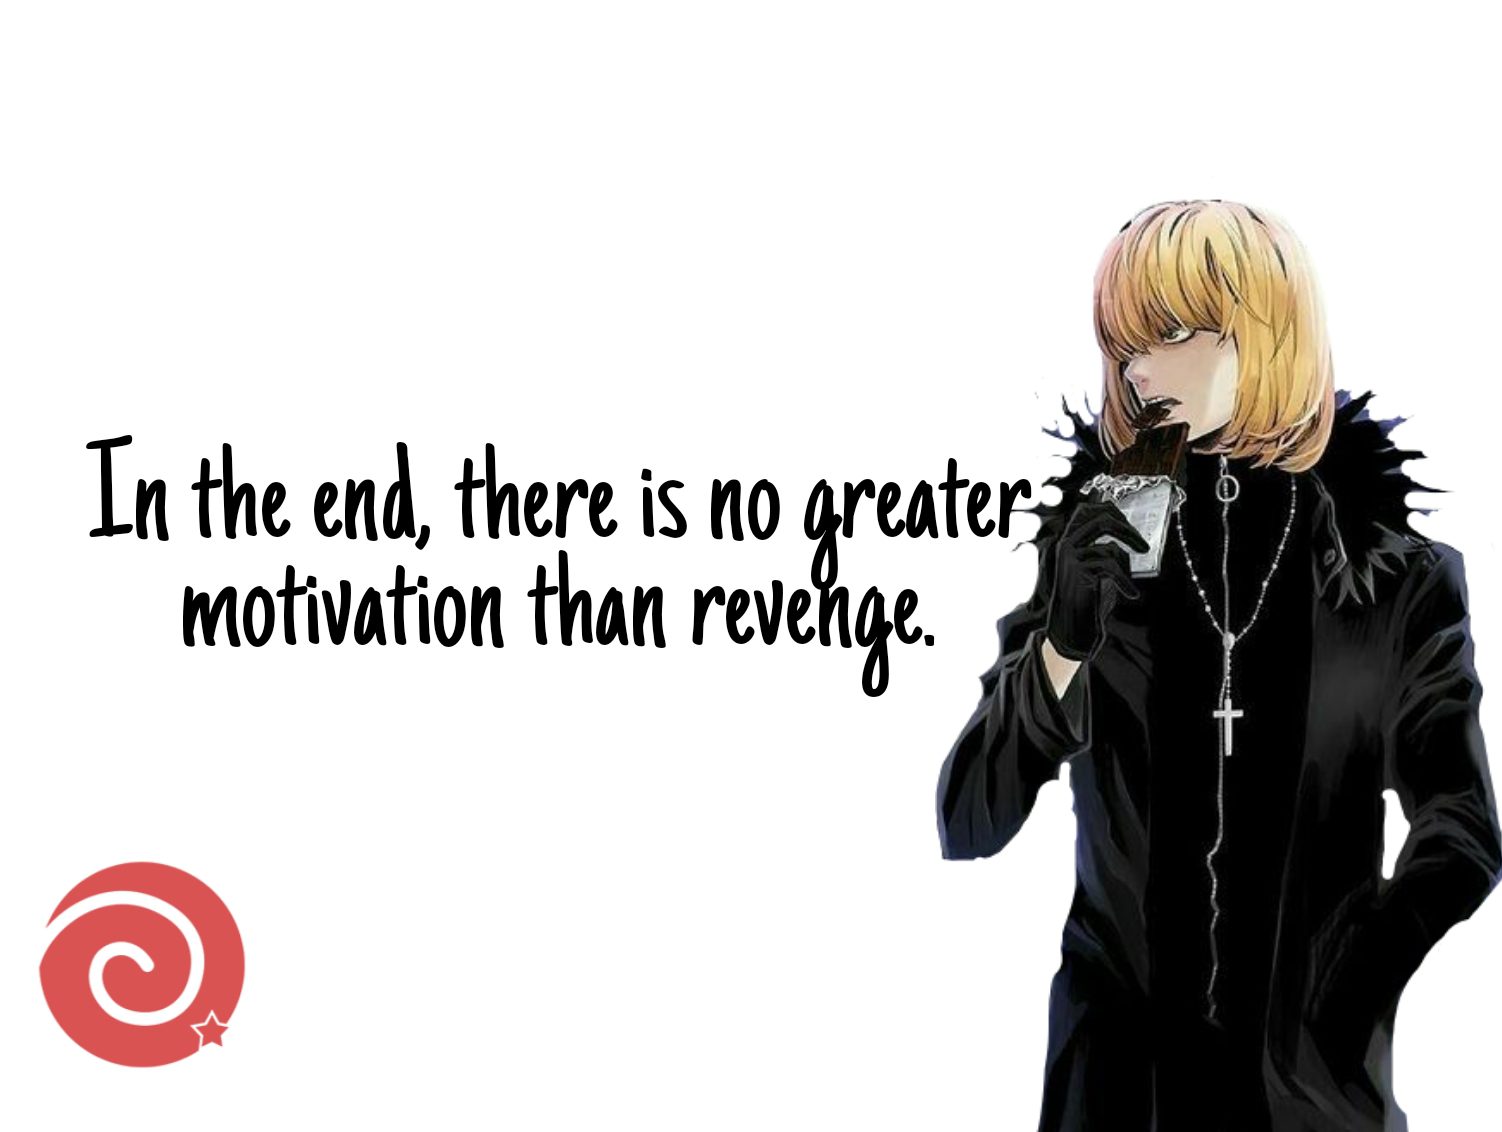 Mello quotes from Death Note